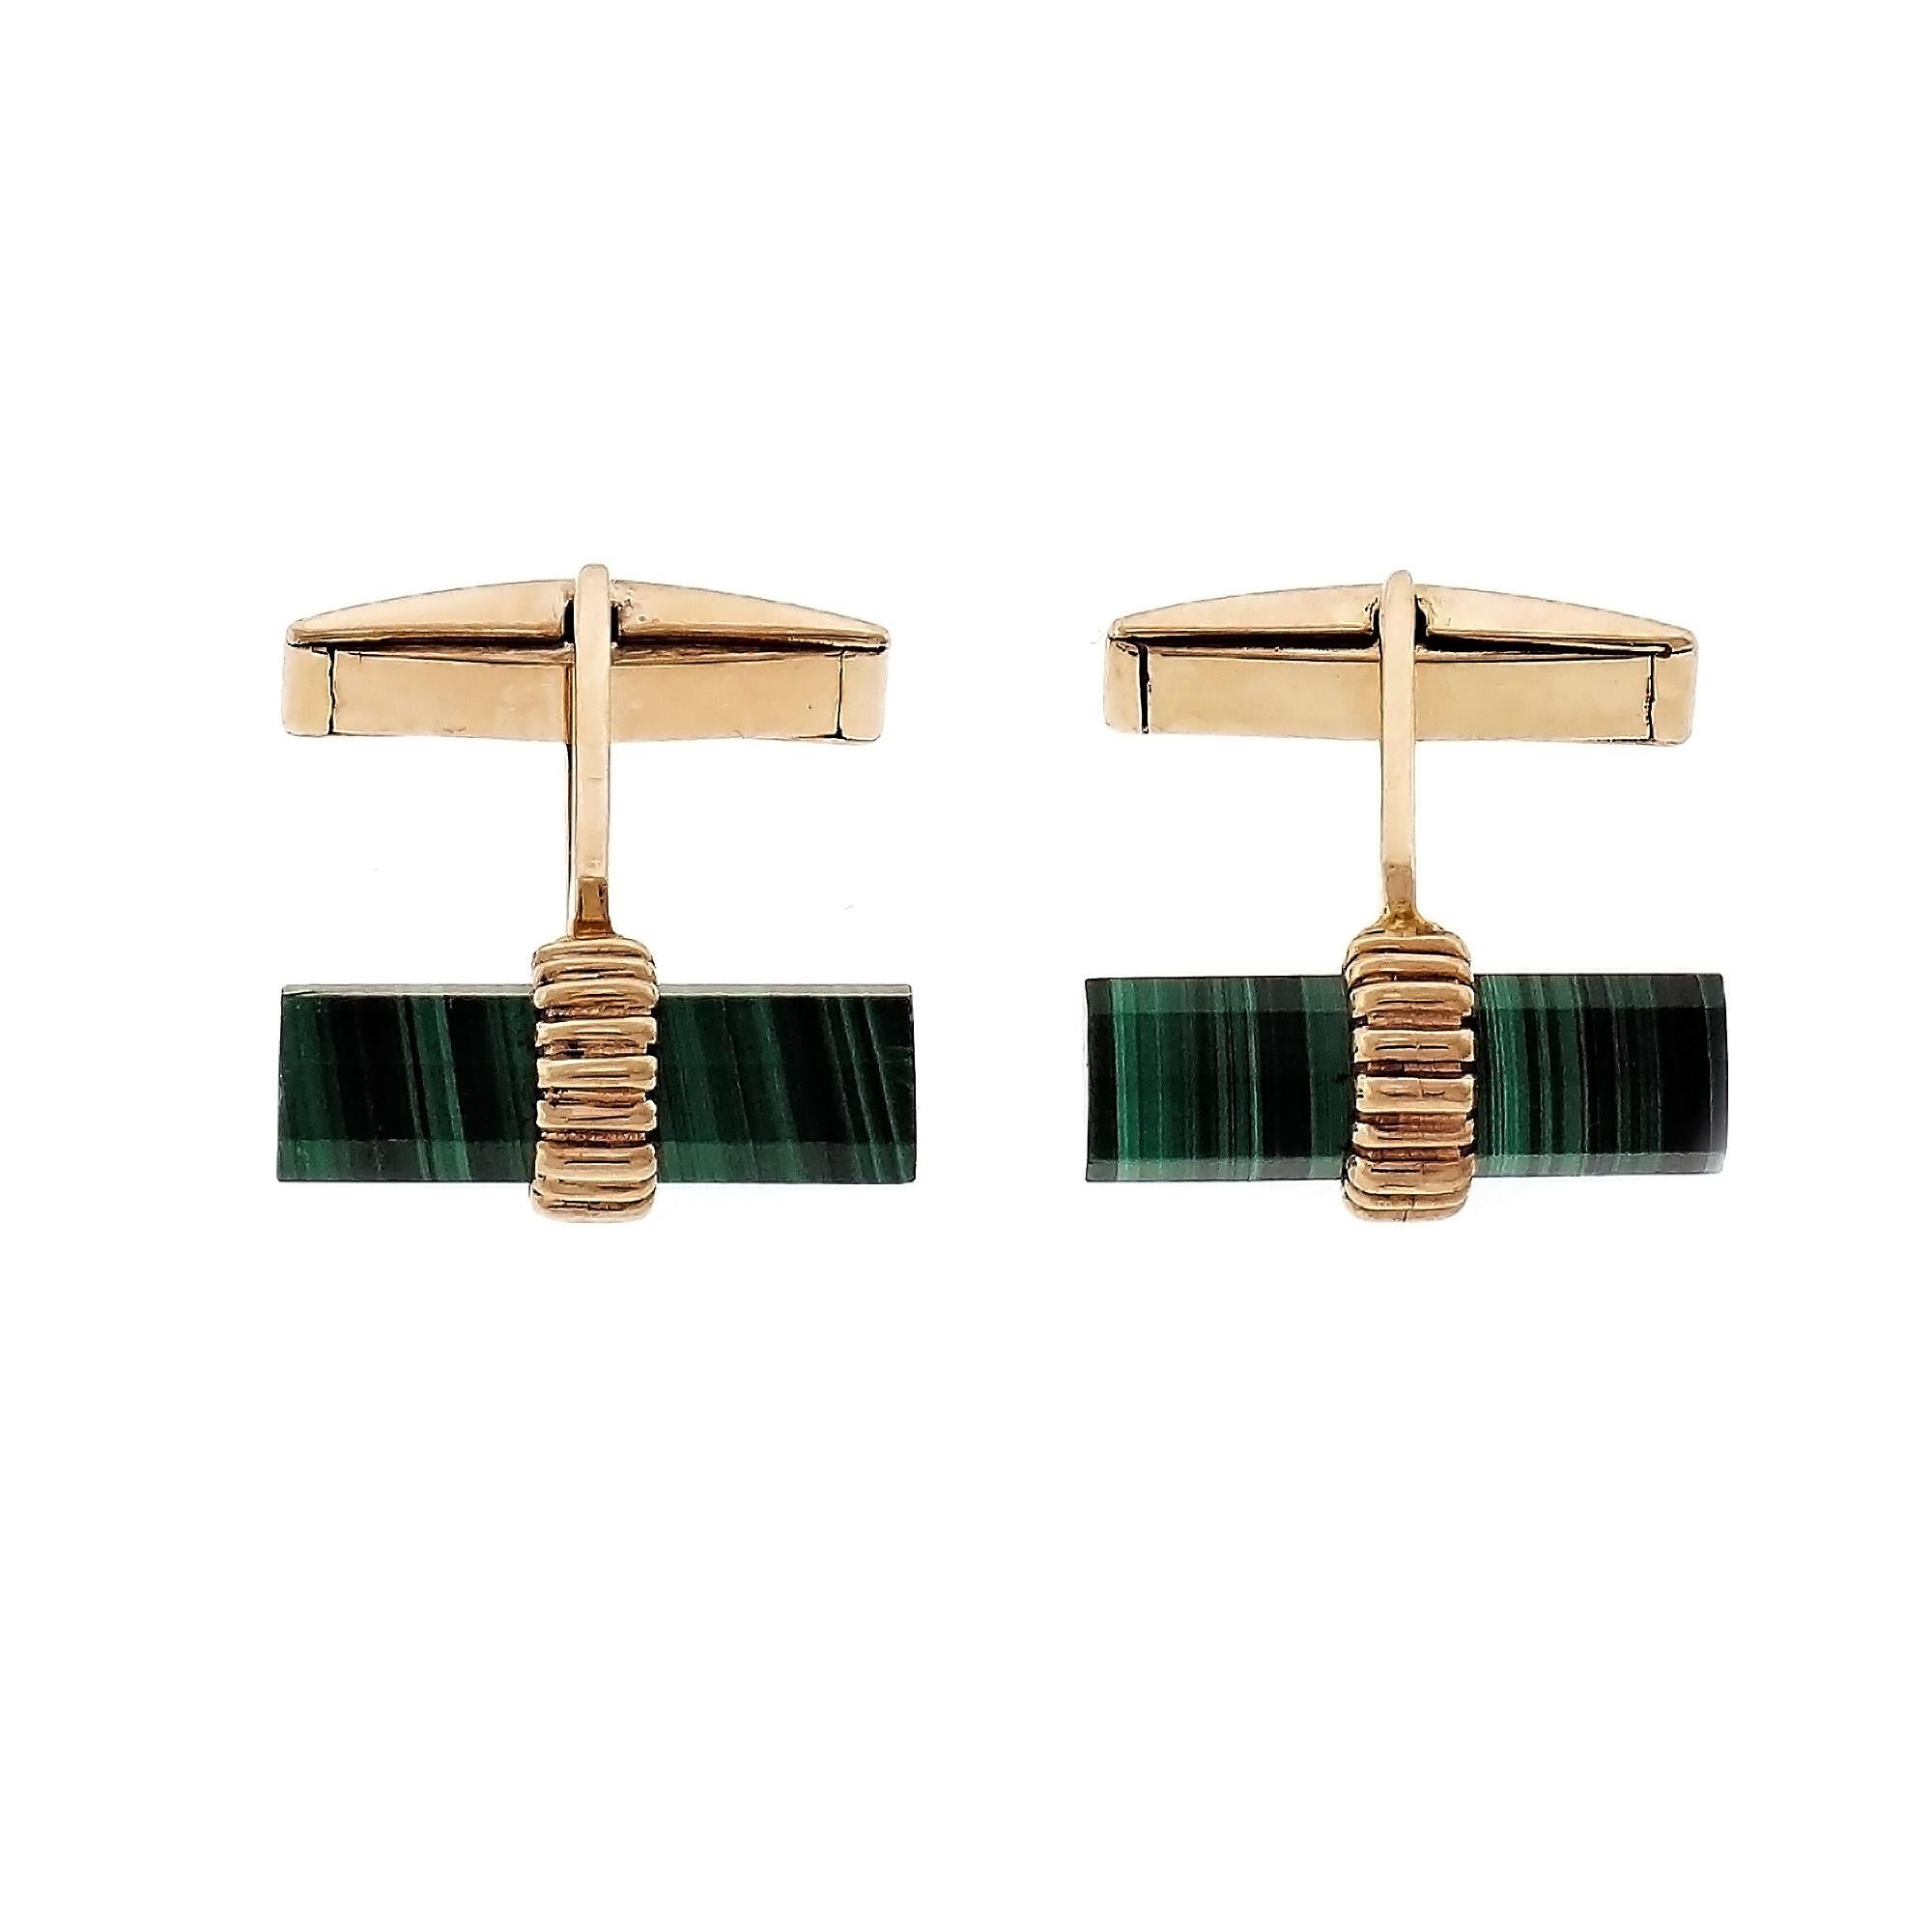 Larter & Sons natural Malachite cufflinks in 14k yellow gold. GIA certified

2 banded green Malachite bars octagonal prism, 20.2 x 6.18 x 6.07mm, GIA certificate #5192463791
14k yellow gold
Tested and stamped: 14k 
Hallmark: Larter 
8.2 grams 
Top